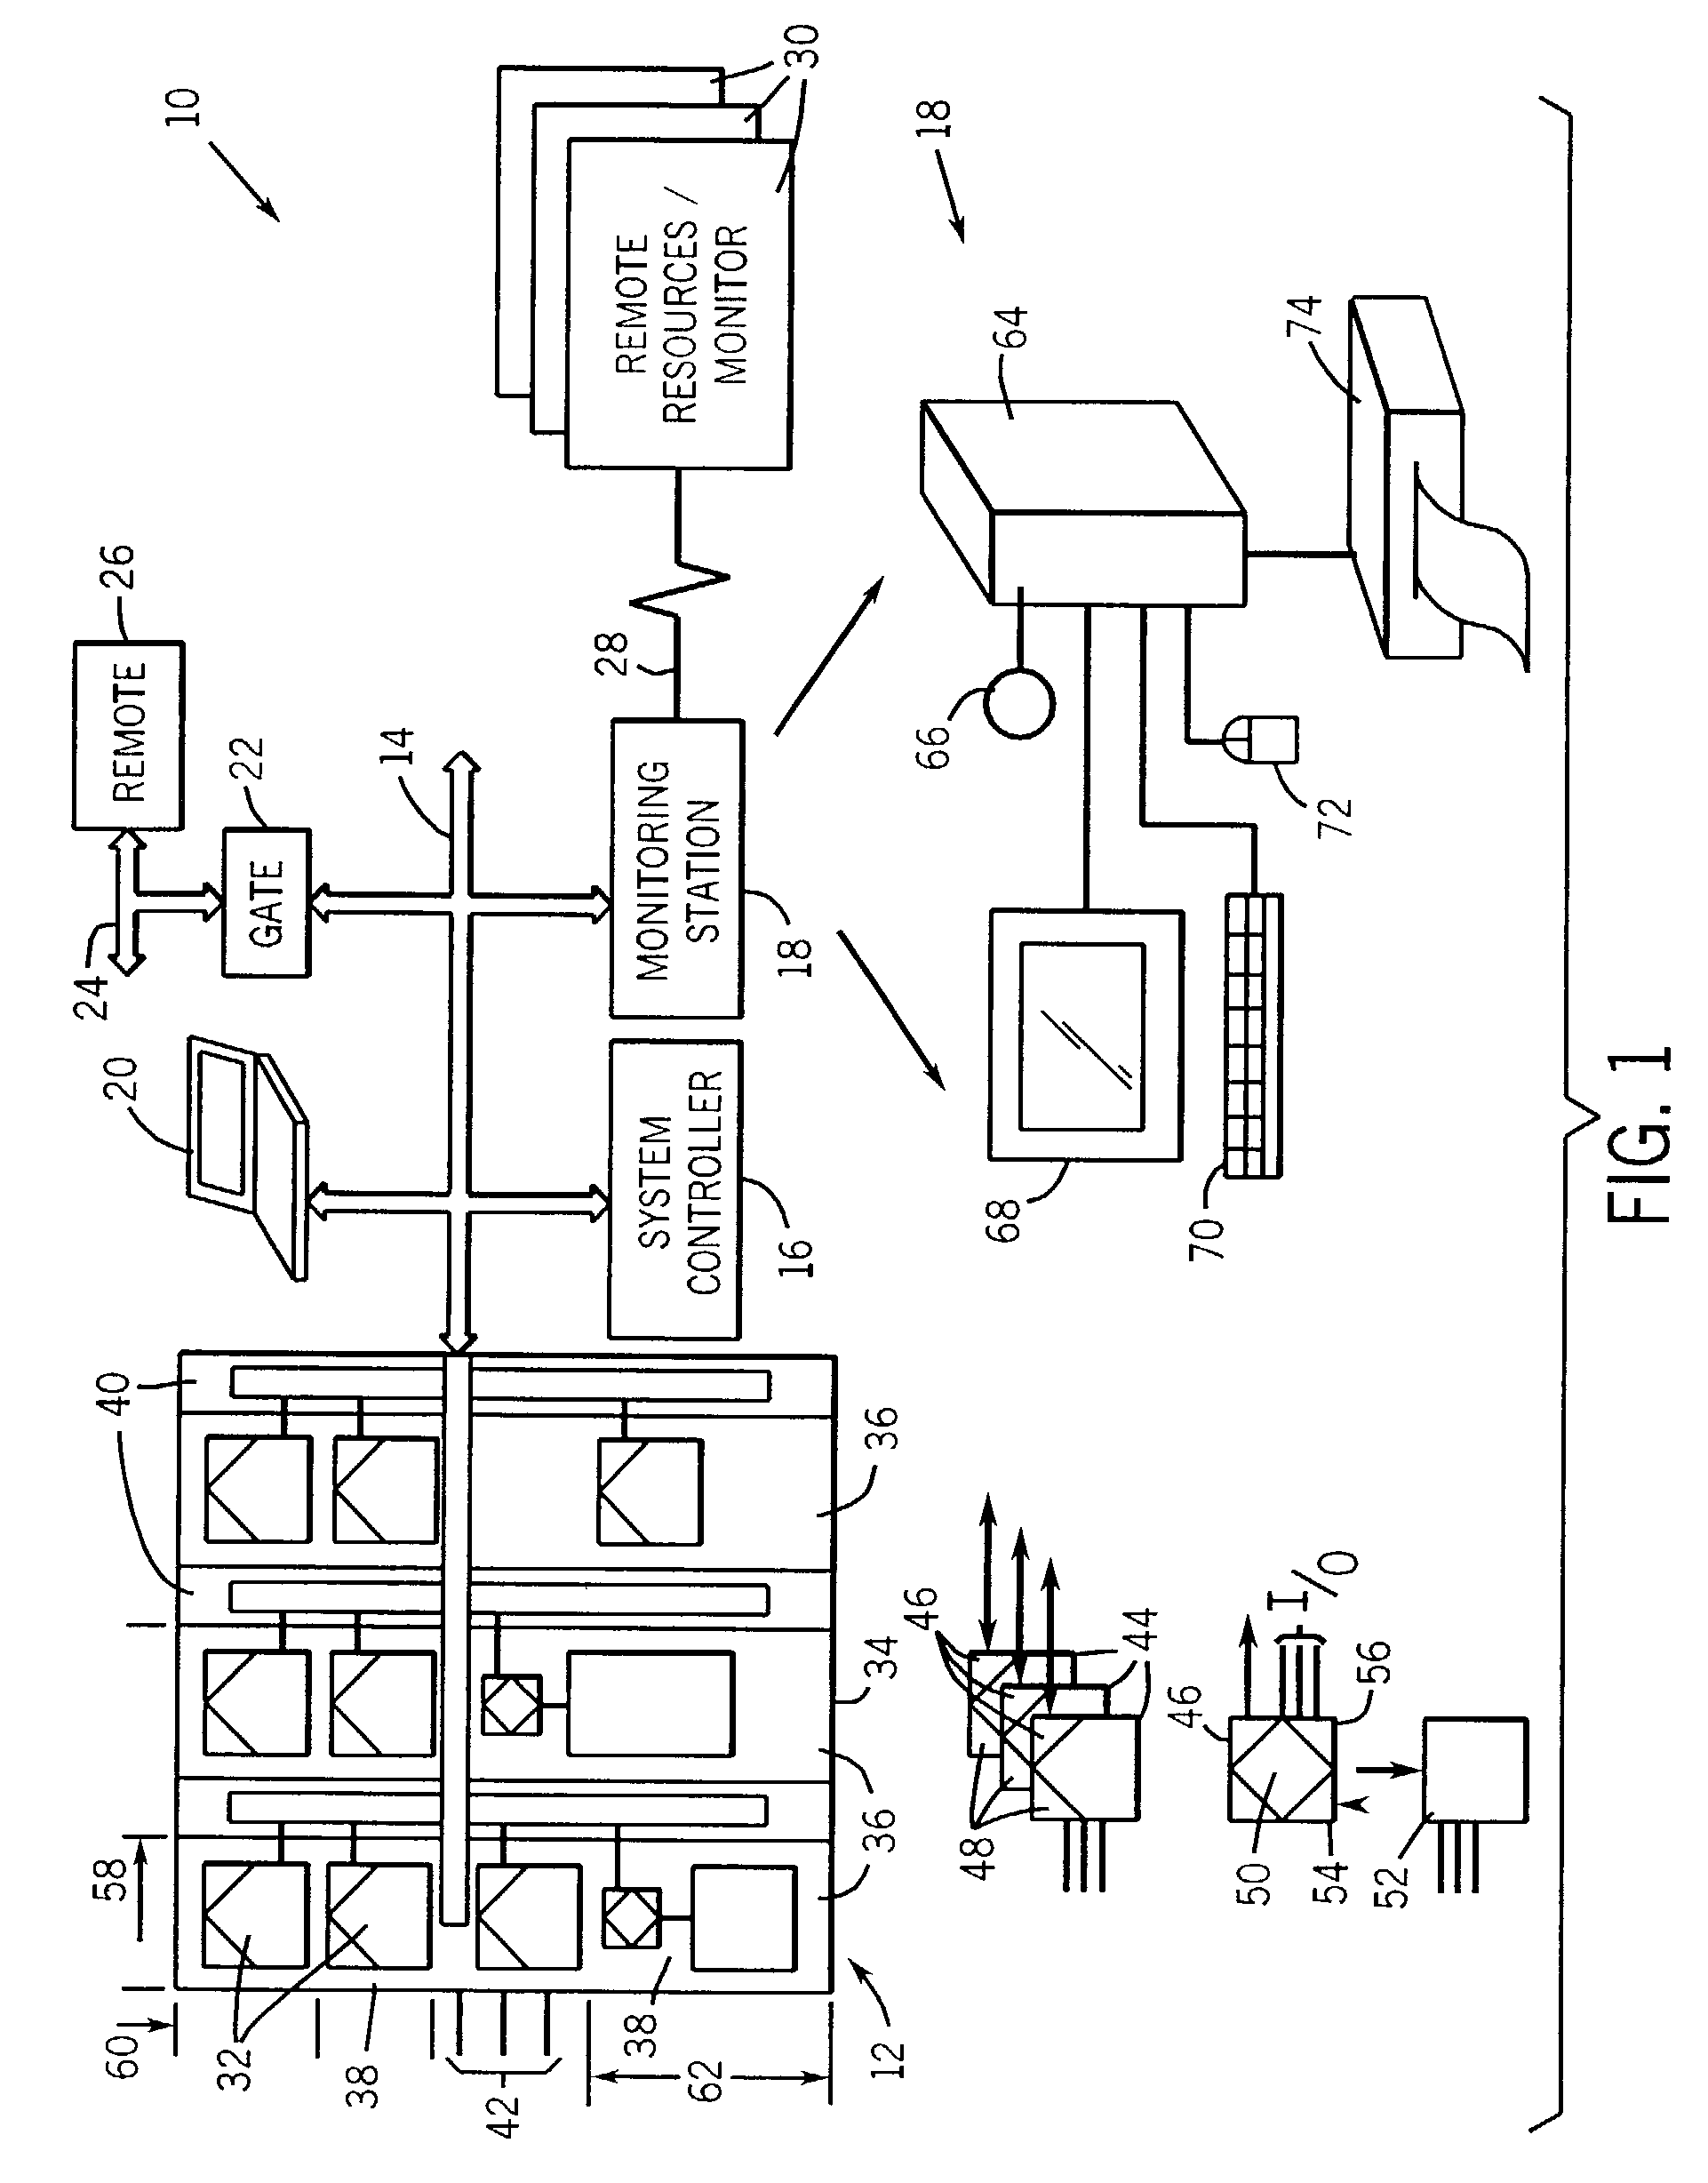 Industrial control and monitoring method and system